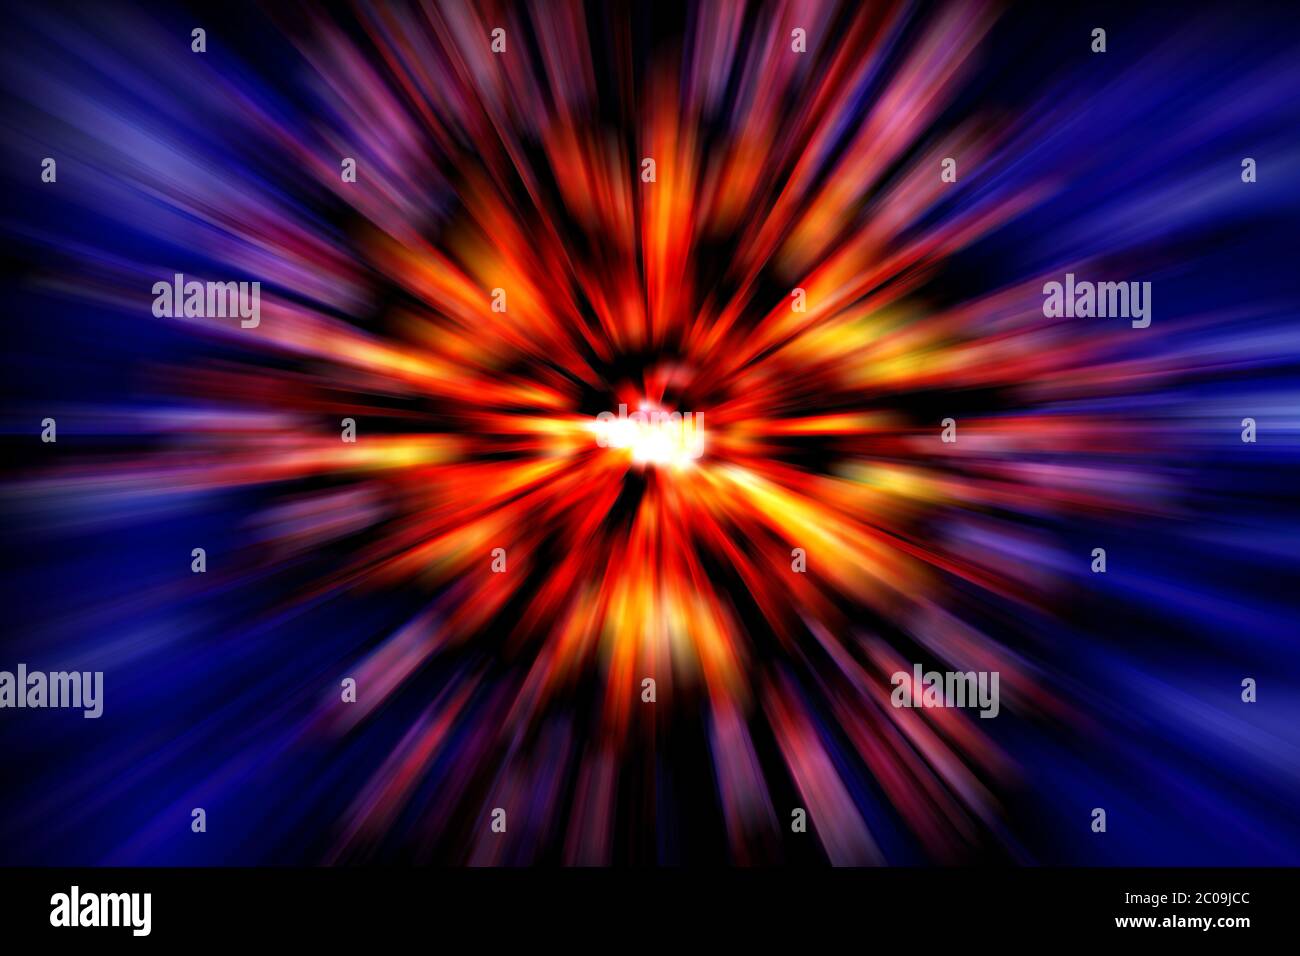 Background image with explosion of red and blue lights with central focal point of interest. Stock Photo